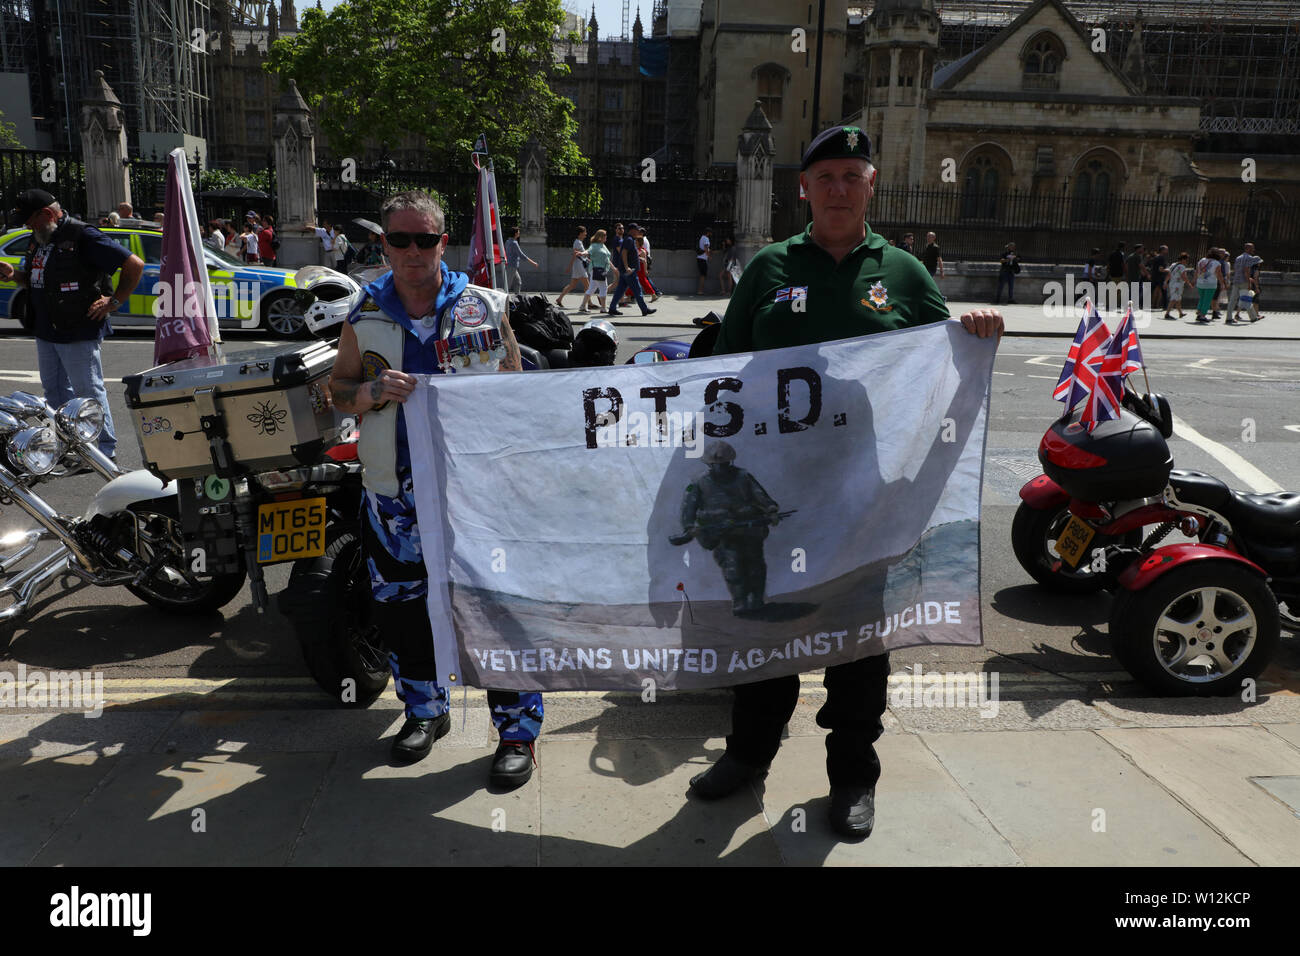 London, UK. 29th June 2019. Army veterans from all over the country gather at Parliament Square to draw attention to several issues they facing such as prosecutions of acts allegedly committed during active service, no help with mental health issues such as Posttraumatic stress disorder (PTSD), isolation and loneliness when leaving the army, and an increasing number of suicides by ex-service men and women. They feel abandoned by those who sent them in conflict in the first place. Credit: Joe Kuis /Alamy News Stock Photo